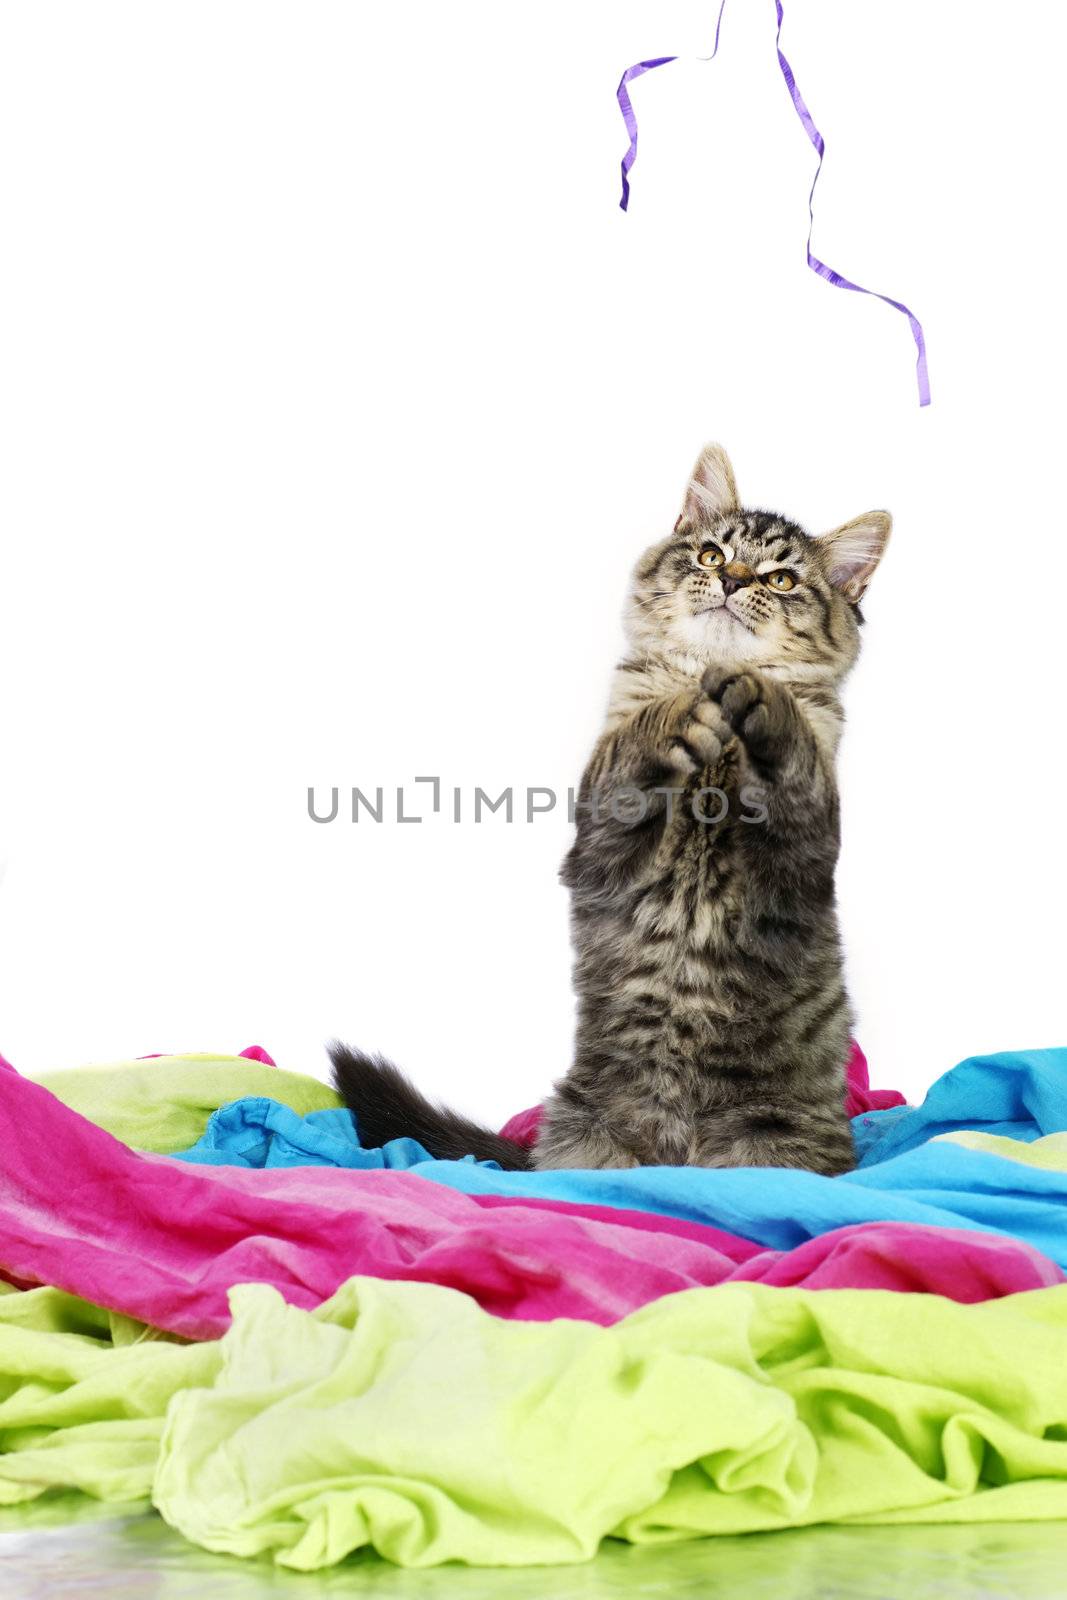 Funny and cute grey tabby kitten up on hind legs trying to catch a purple string, room for your text, perfect for cat calendar.